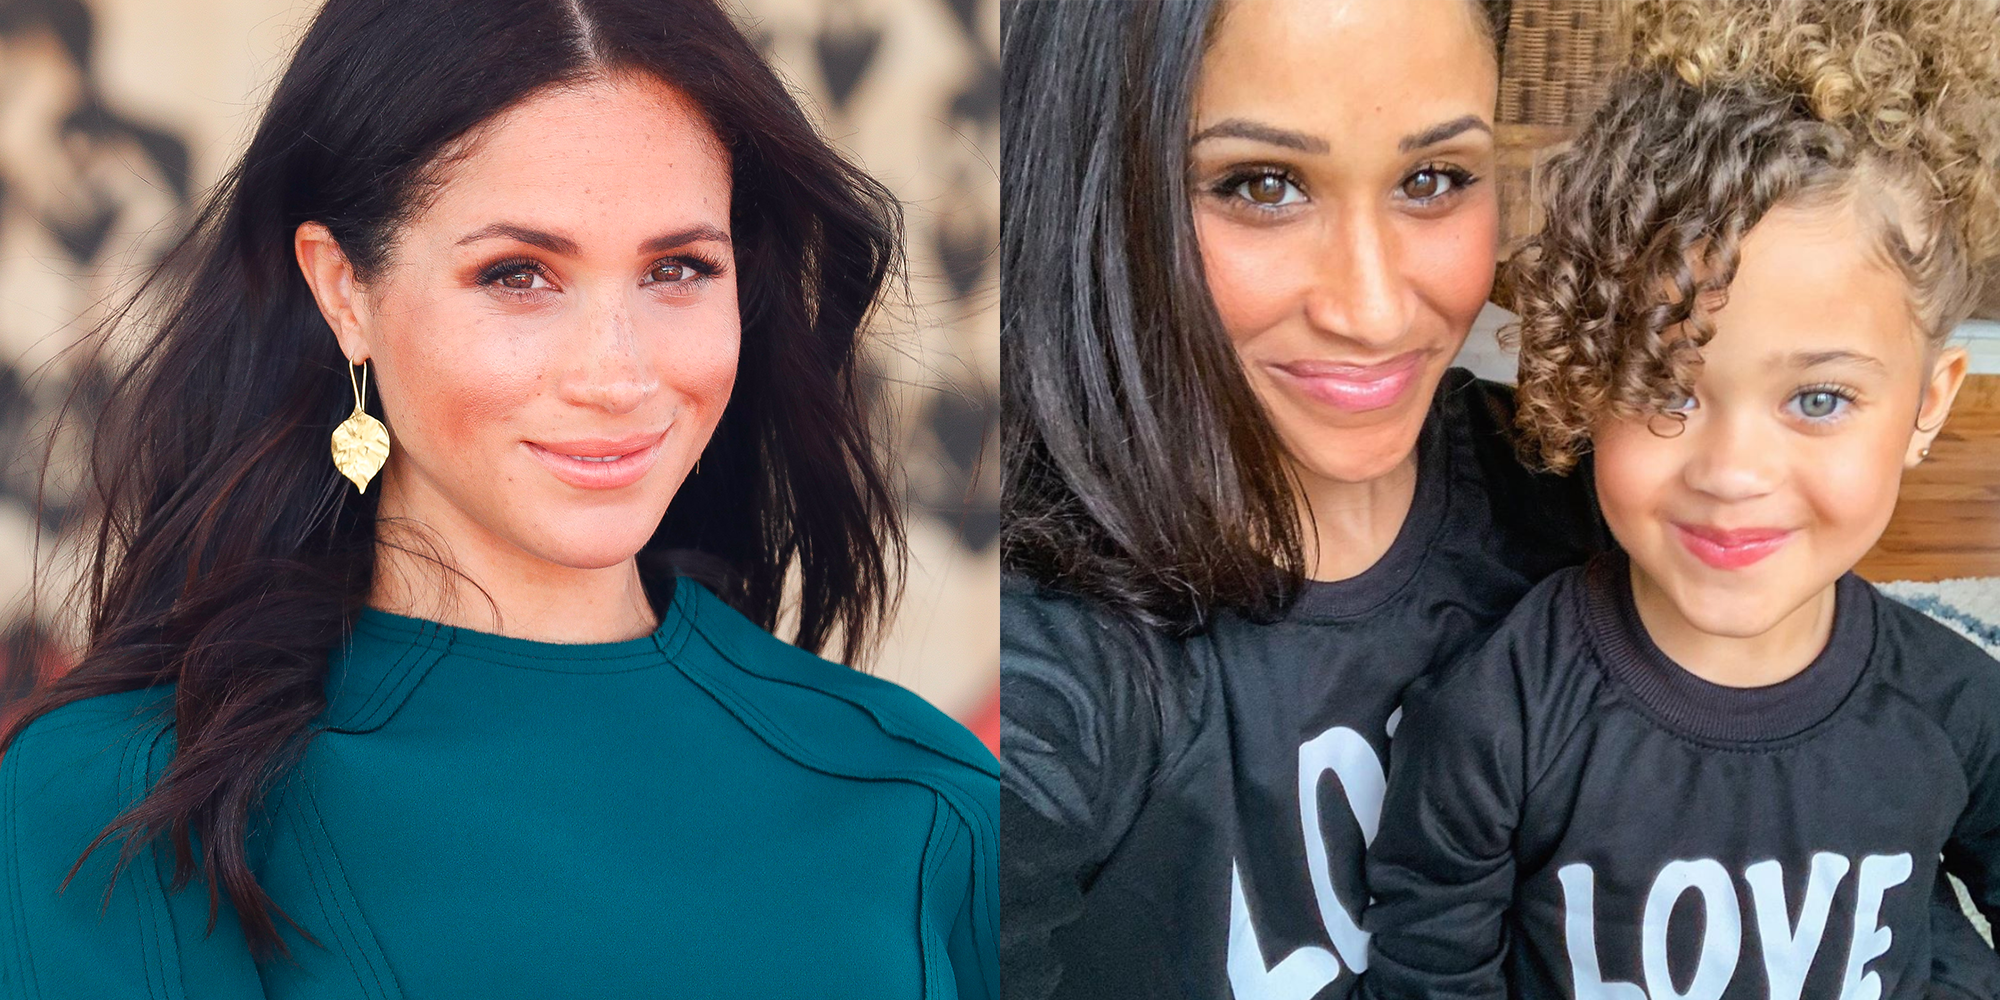 This Missouri Mom Is Meghan Markle S Lookalike Or Long Lost Twin